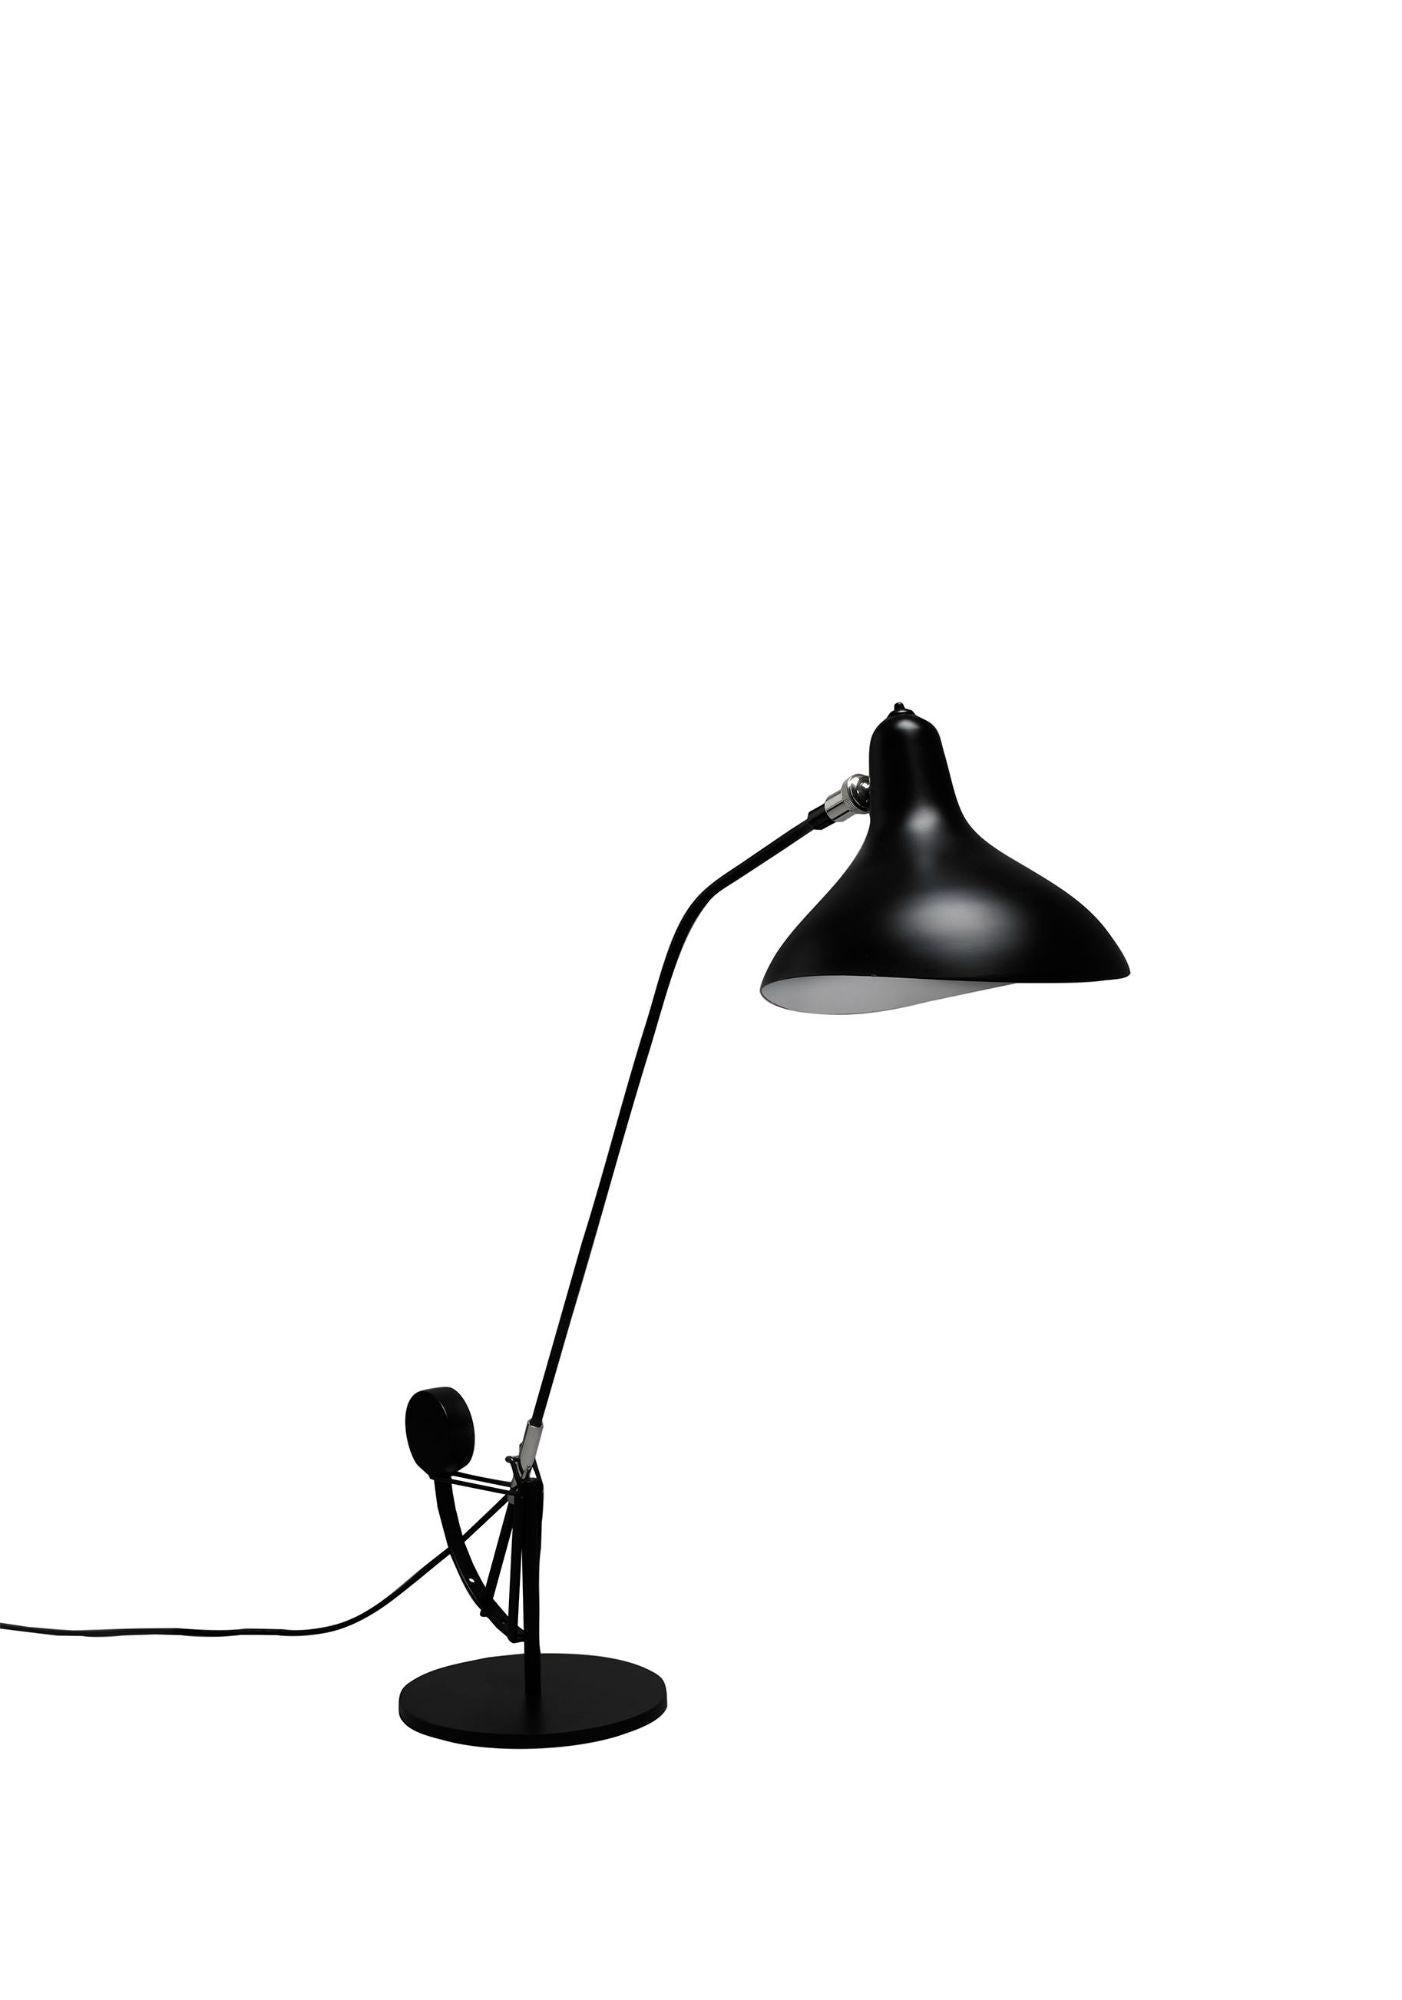 DCW Editions Mantis BS3 Table Lamp in Black Steel and Aluminum by Bernard Schottlander
 
 Bernard Schottlander was born in Mainz, Germany in 1924 and moved to England in 1939. After serving with the British Army in India, he learnt to weld and took